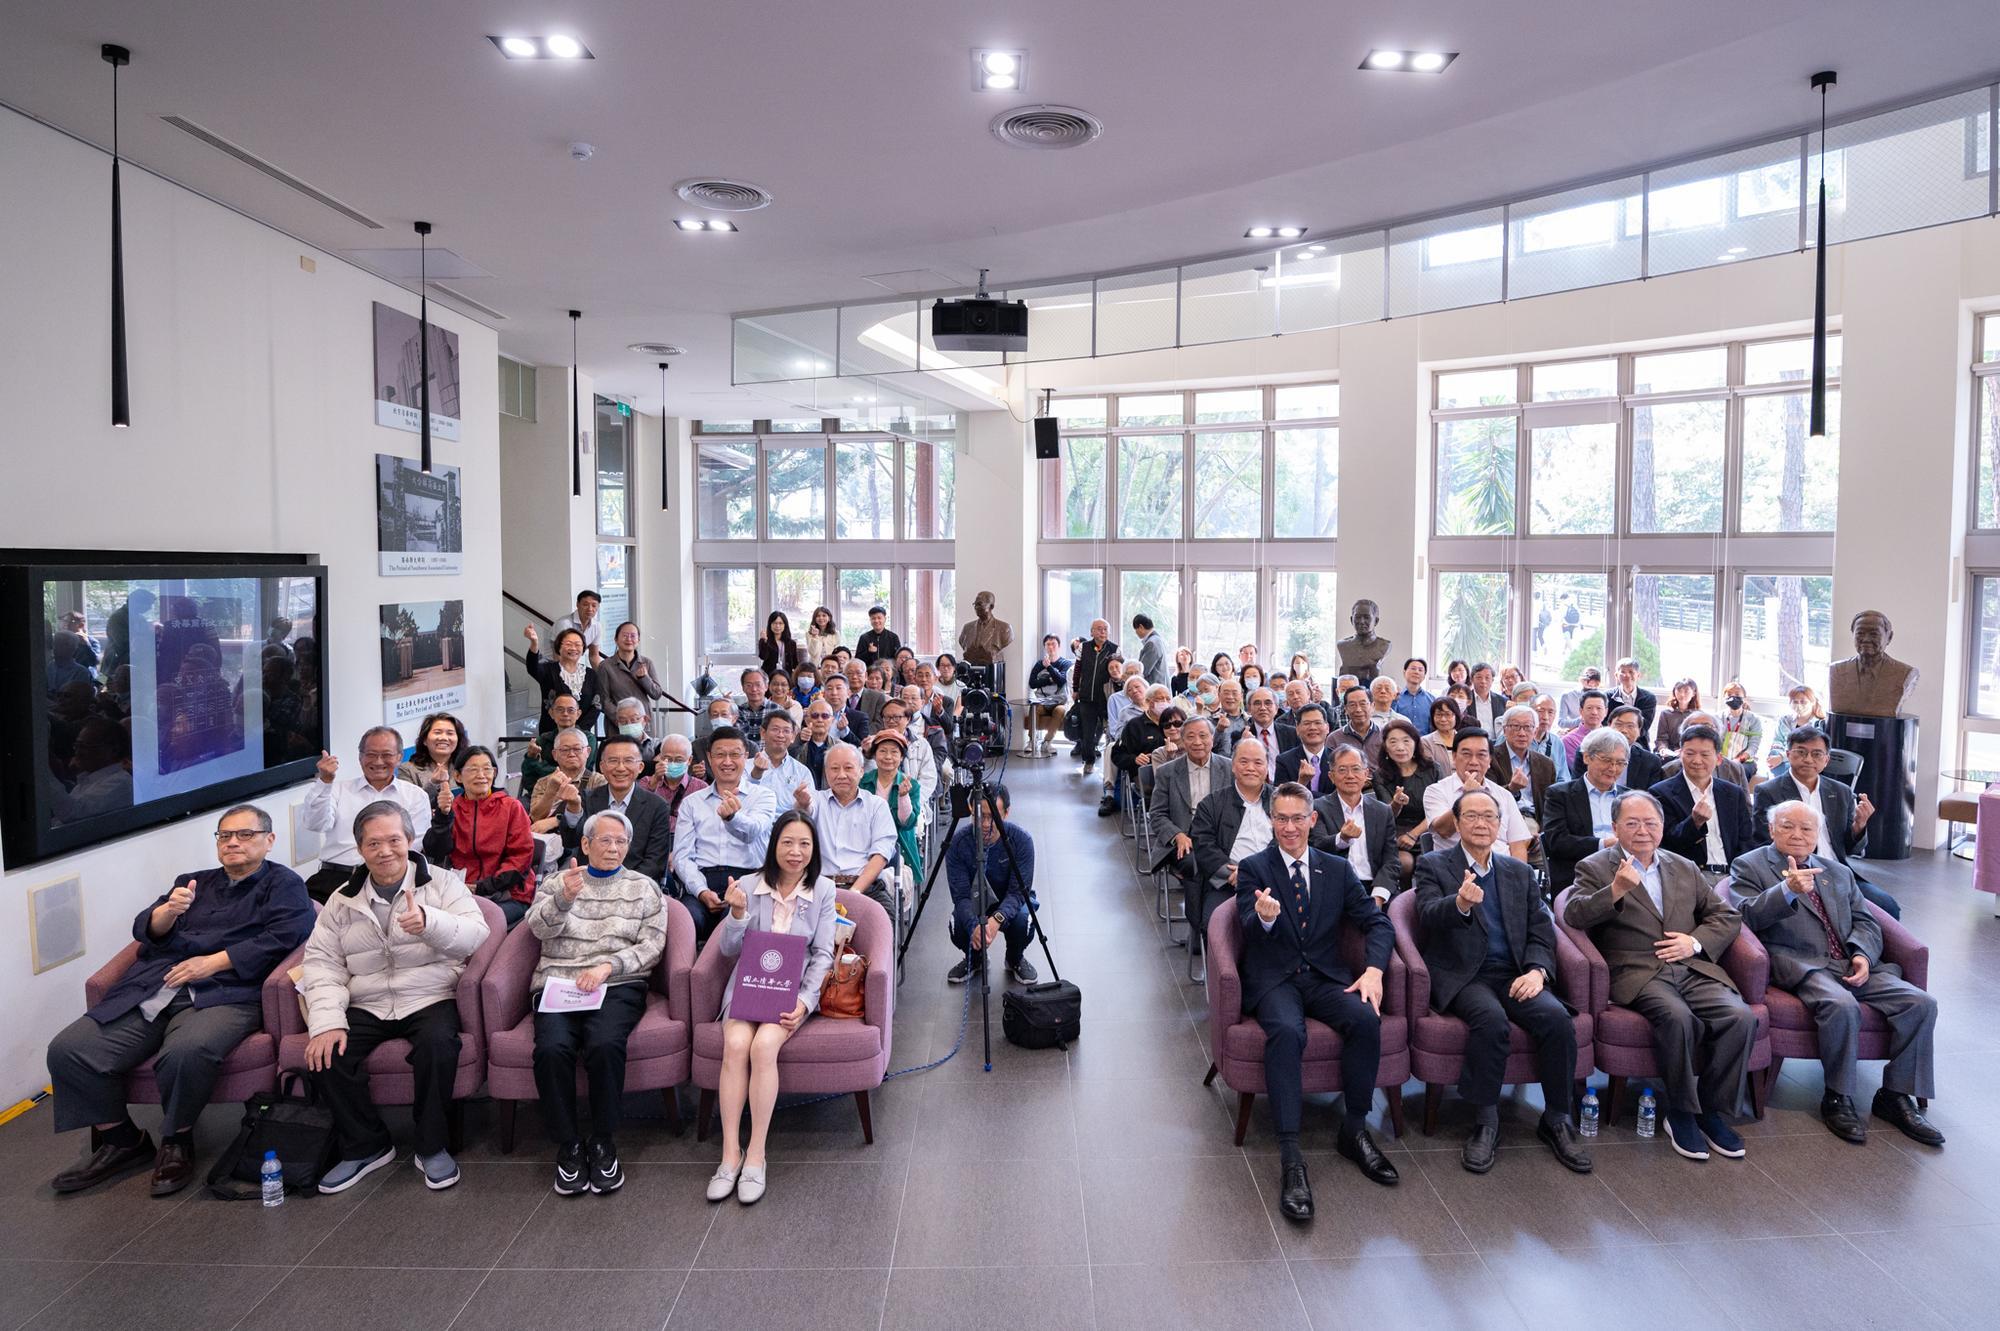 Friends, colleagues, and faculty gathered at the Hall of Fame to share their memories and interactions with Professor Yi-Yan Li (李怡嚴).